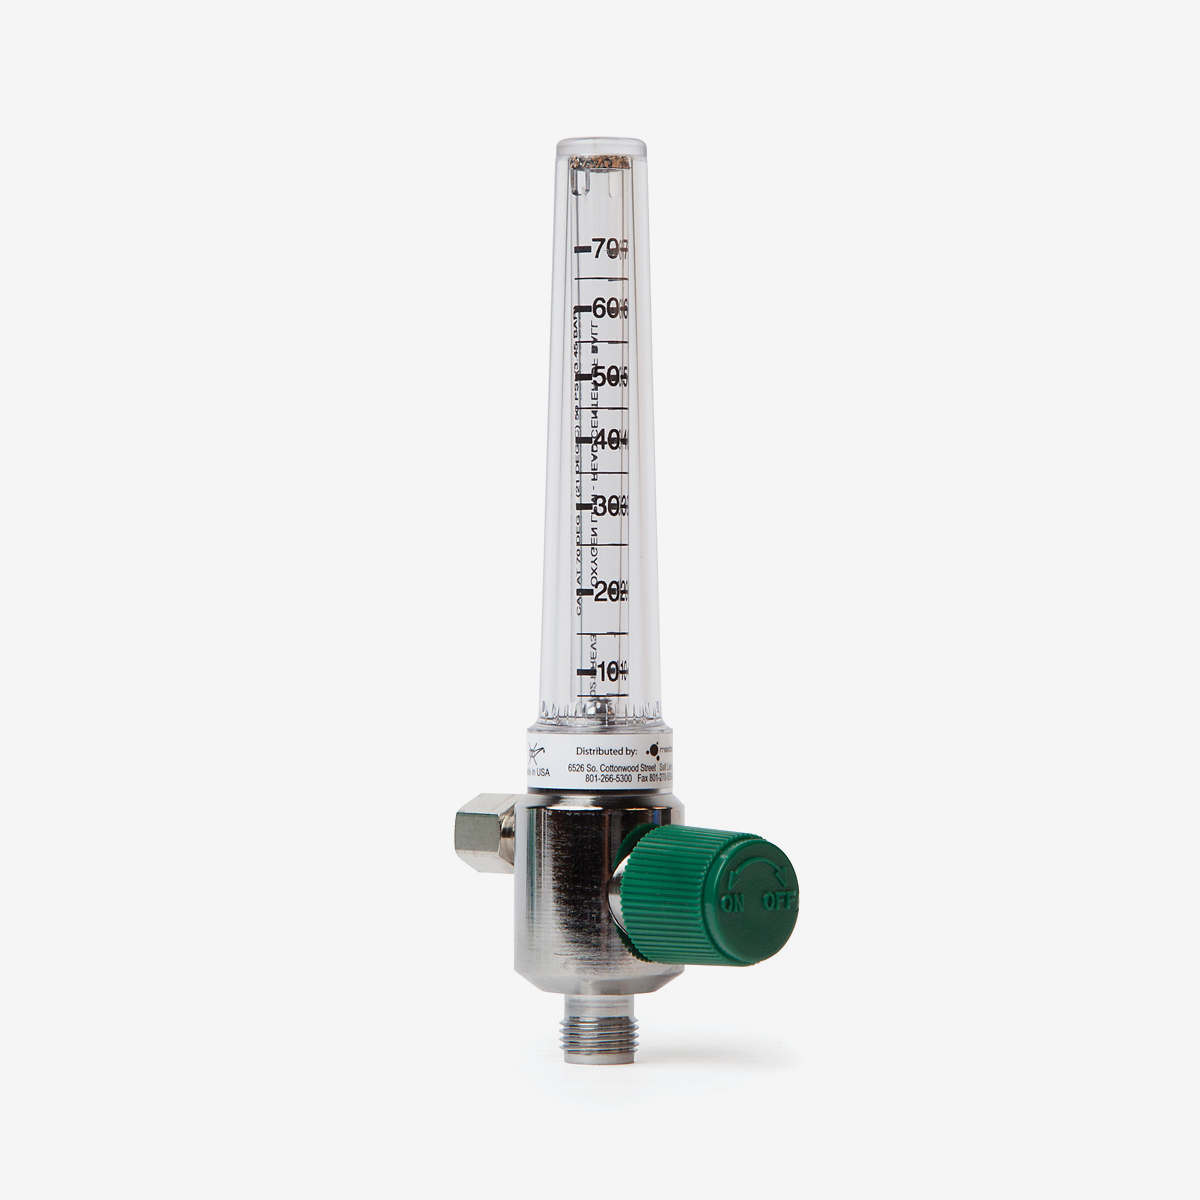 0-70 liters per minute flow meter with green knob on white background, shown at an angle